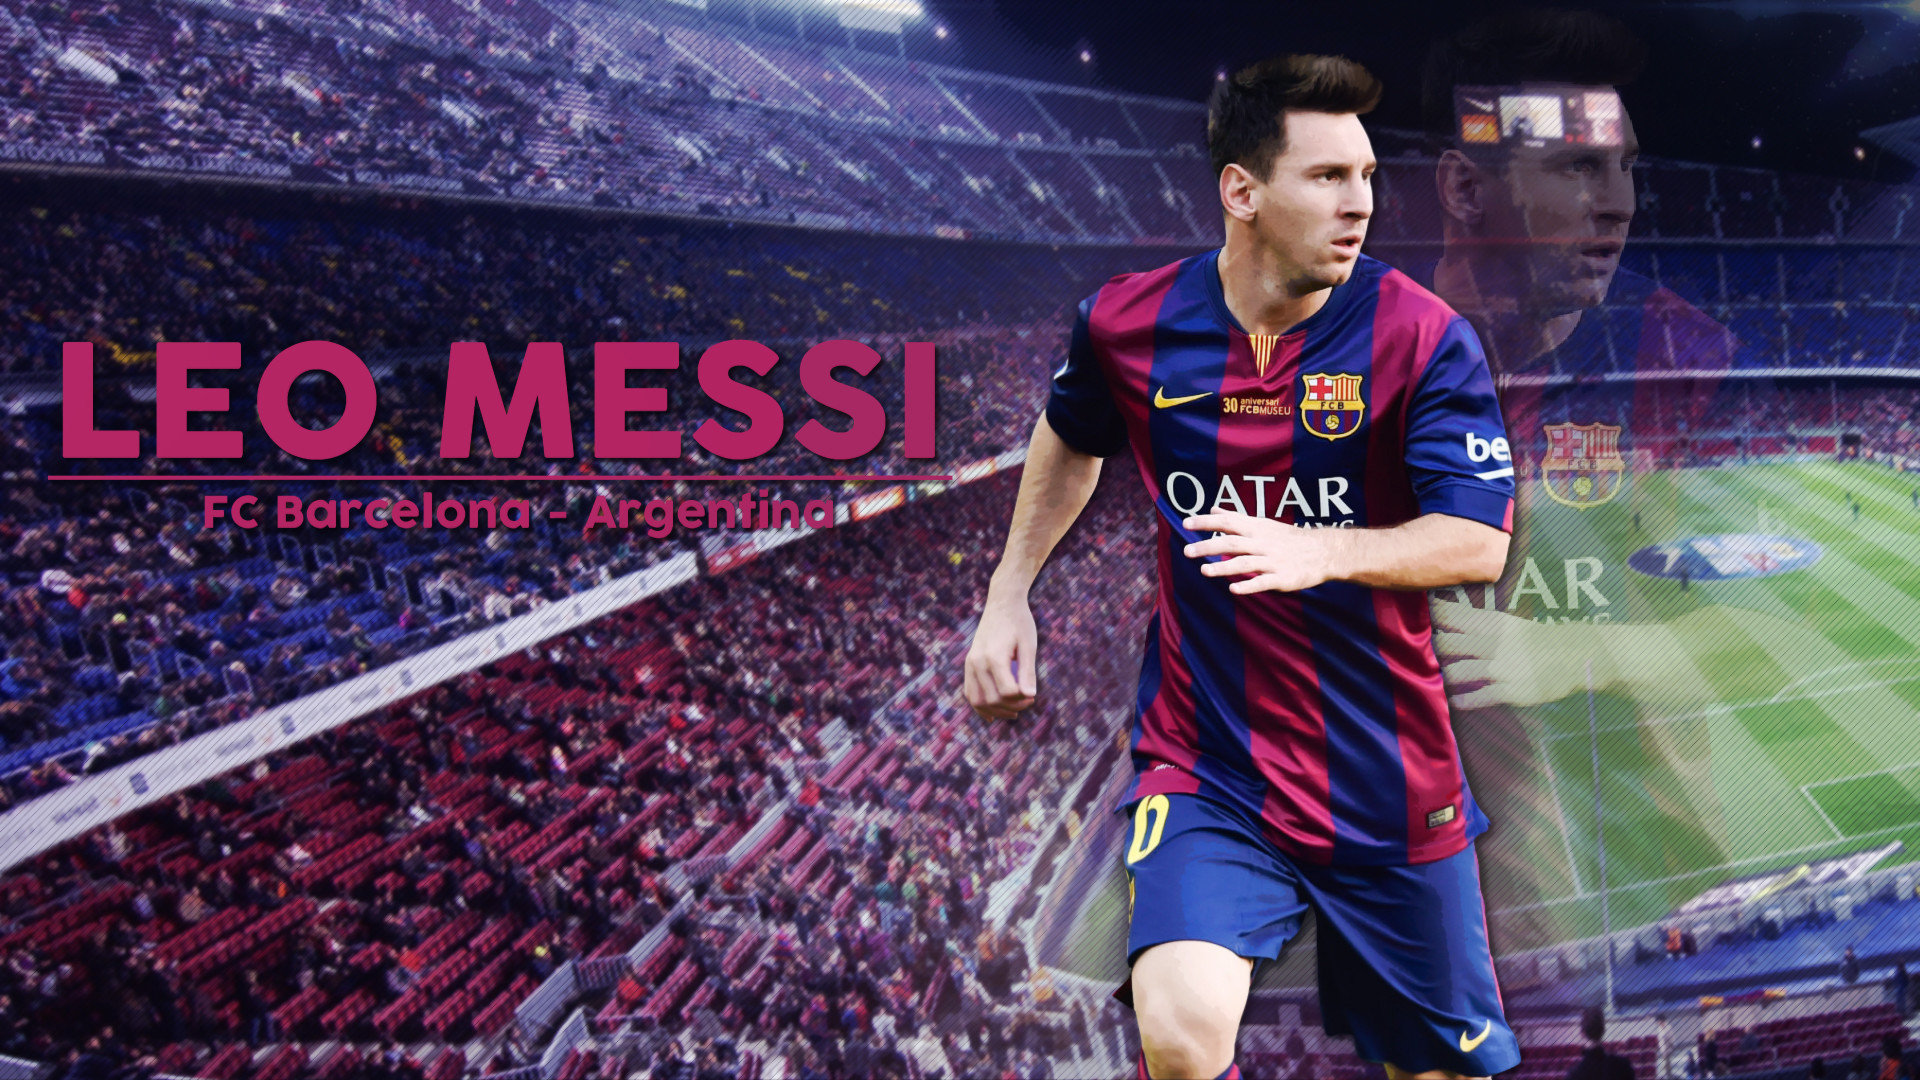 1920x1080 Messi Wallpapers HD Old. Leo Messi wallpaper Barcelona